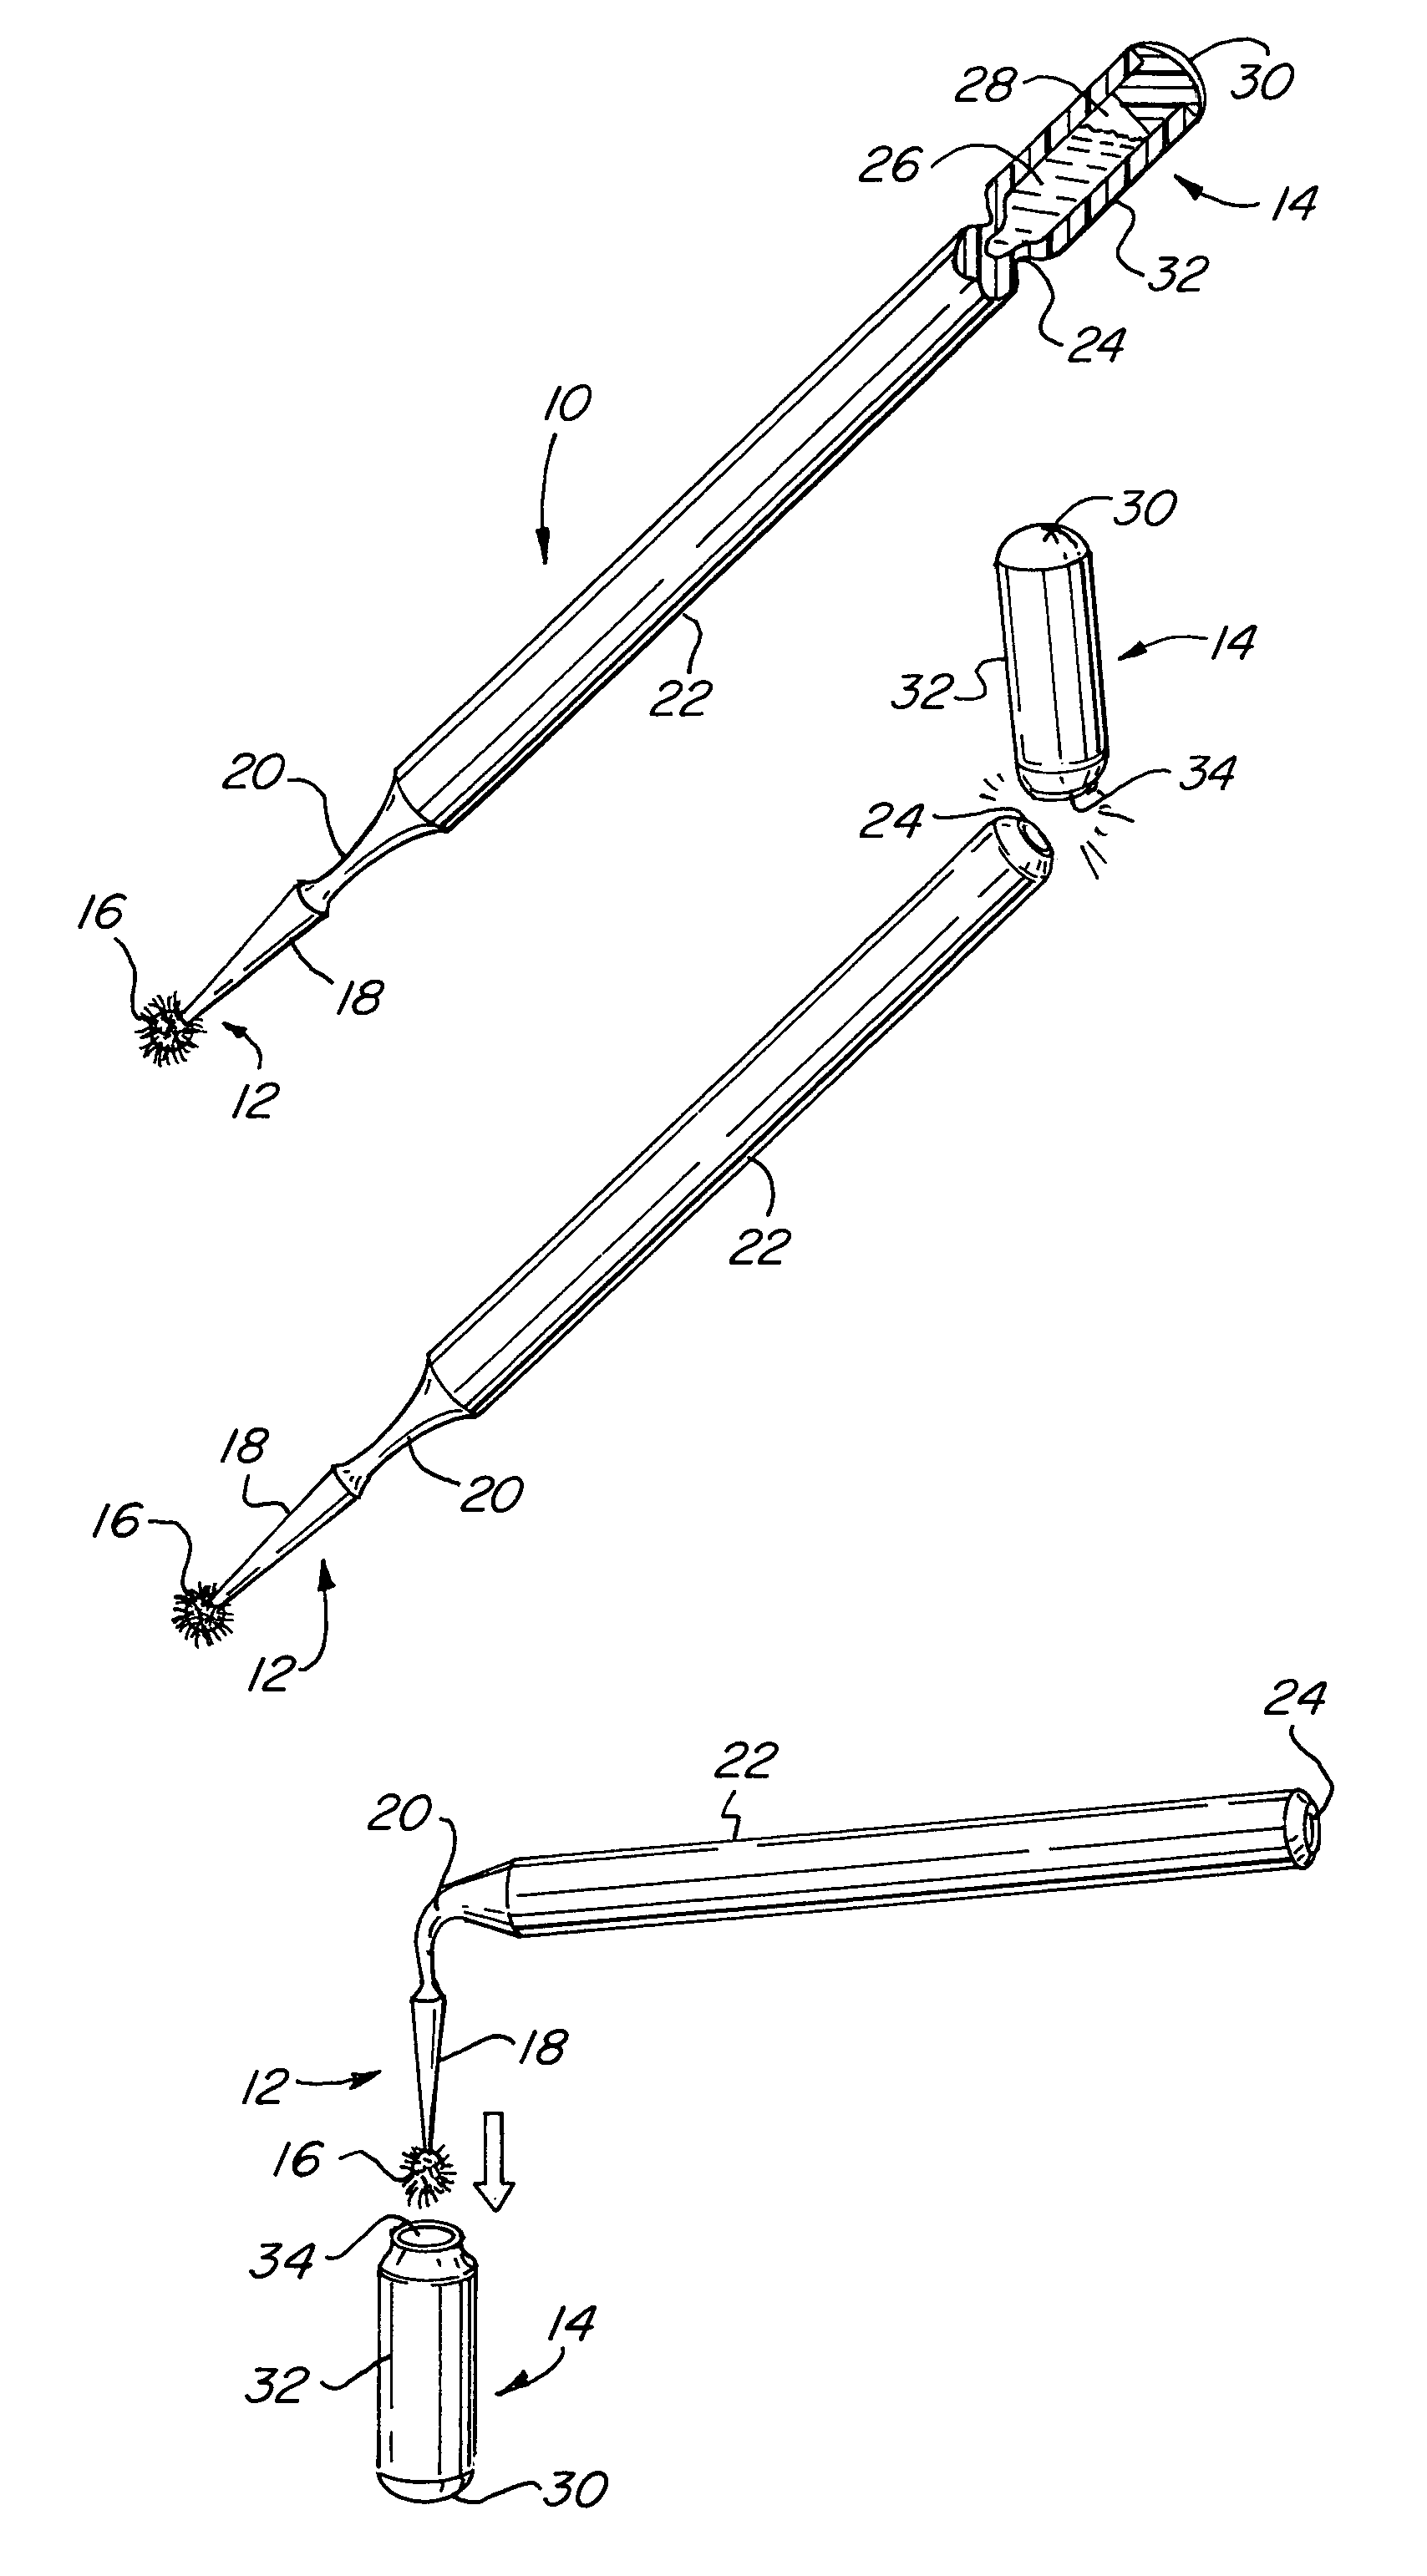 Unit dose applicator with material chamber